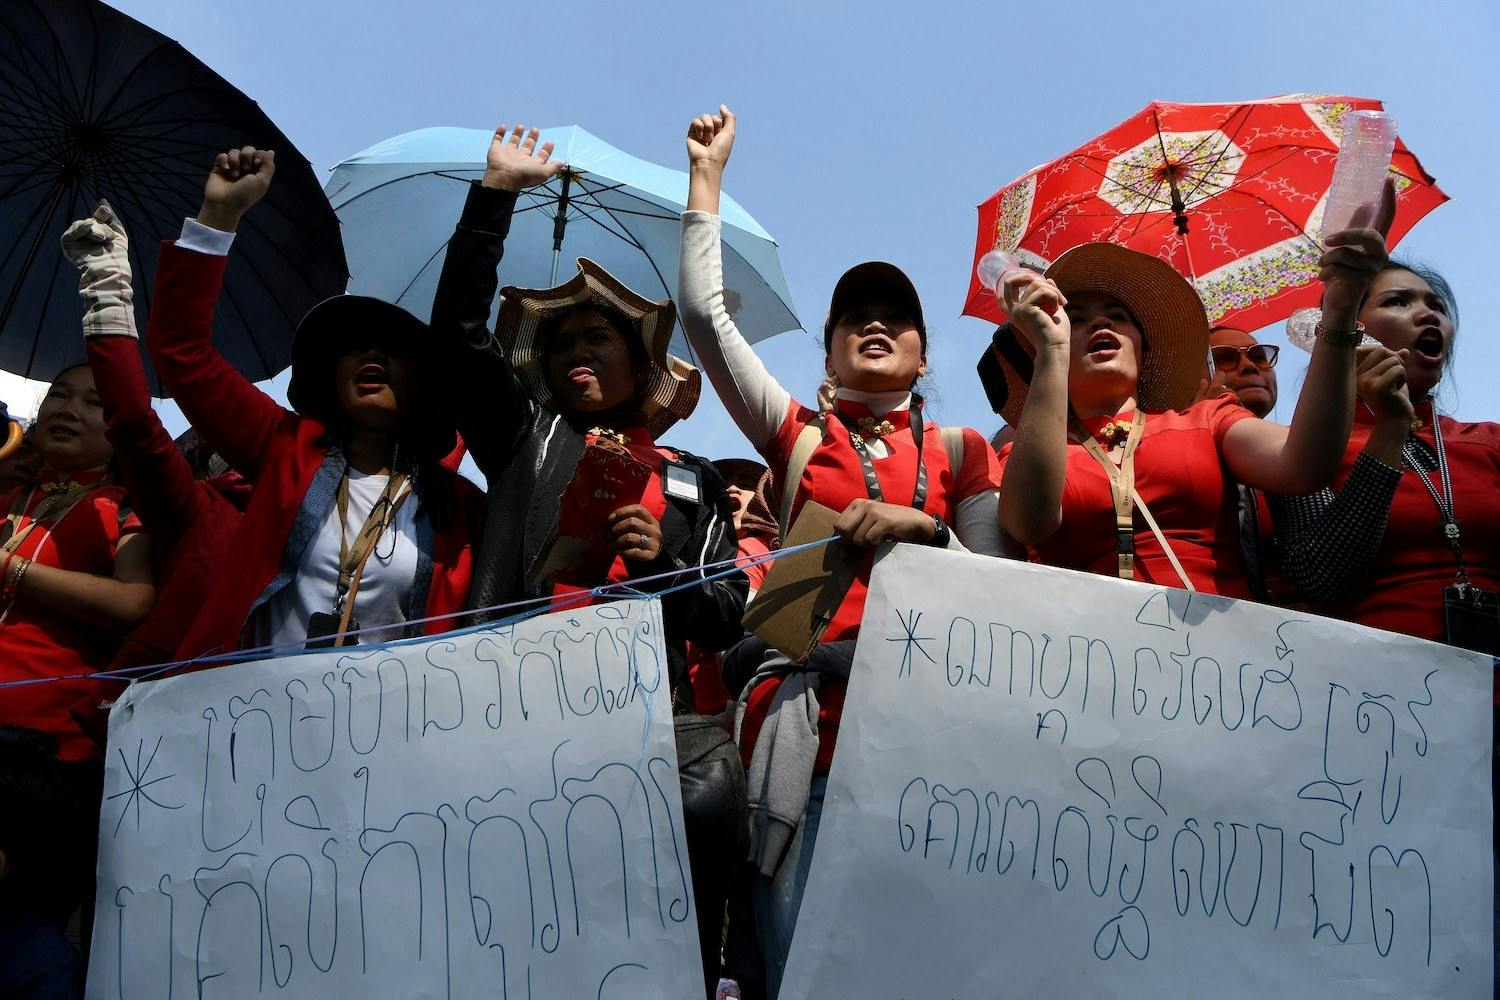 Workers striking in Cambodia